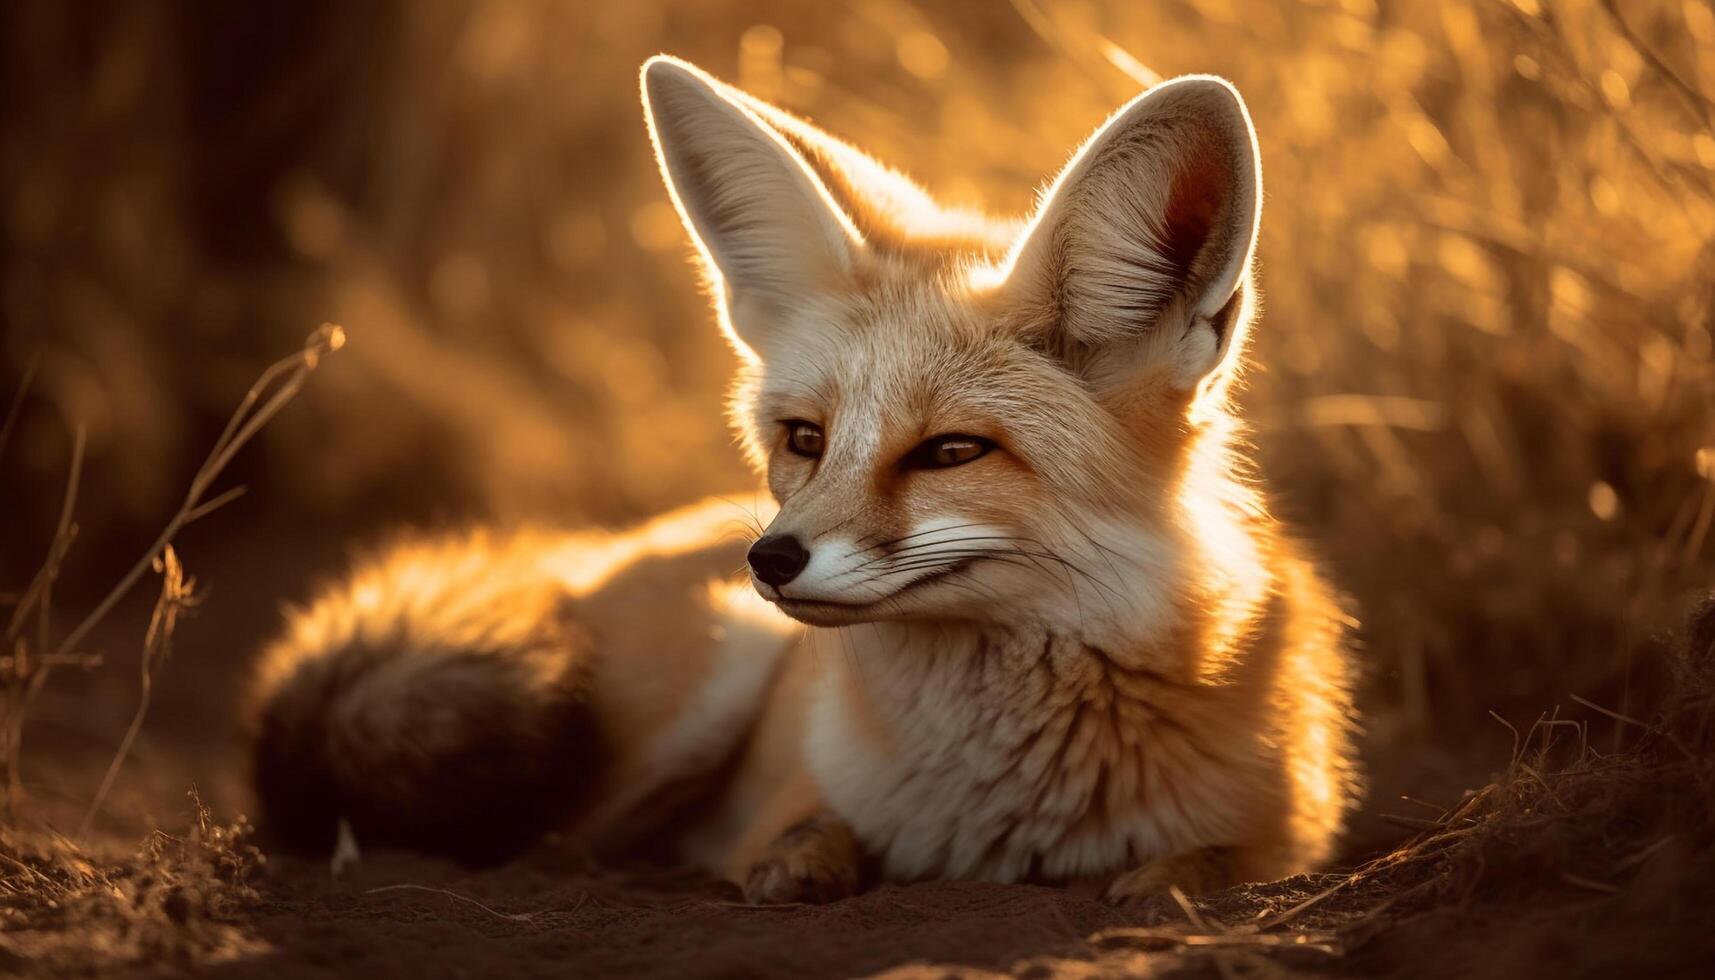 fox lying wild animal in grass nature scene generated by AI photo